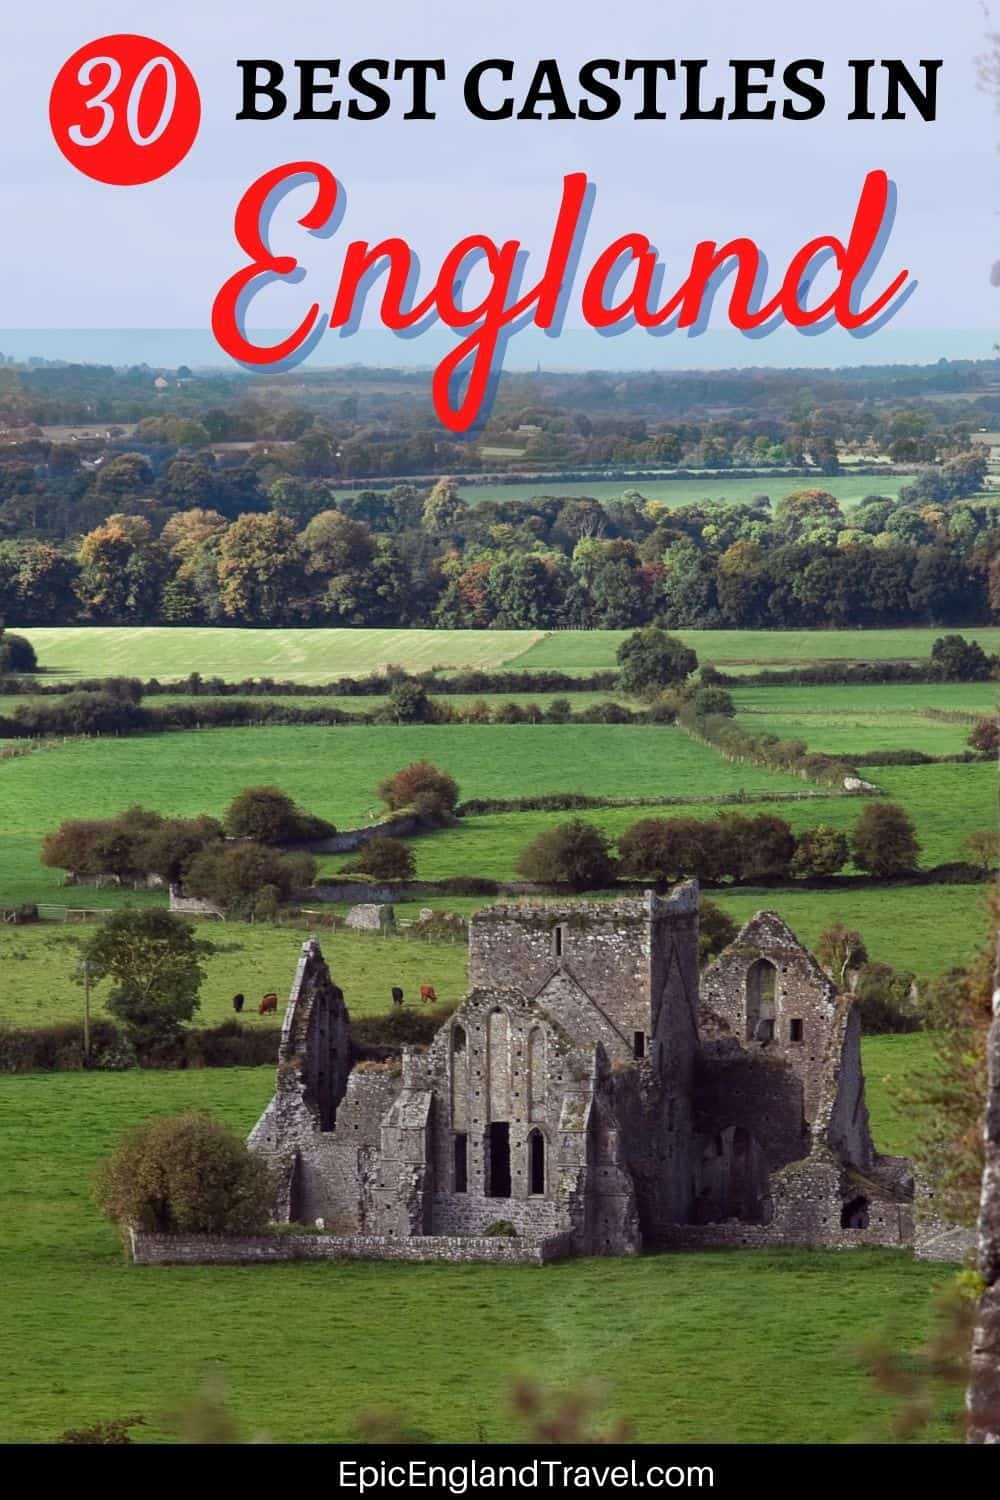 Pinterest image of a castle in England with the text: Best Castles in England